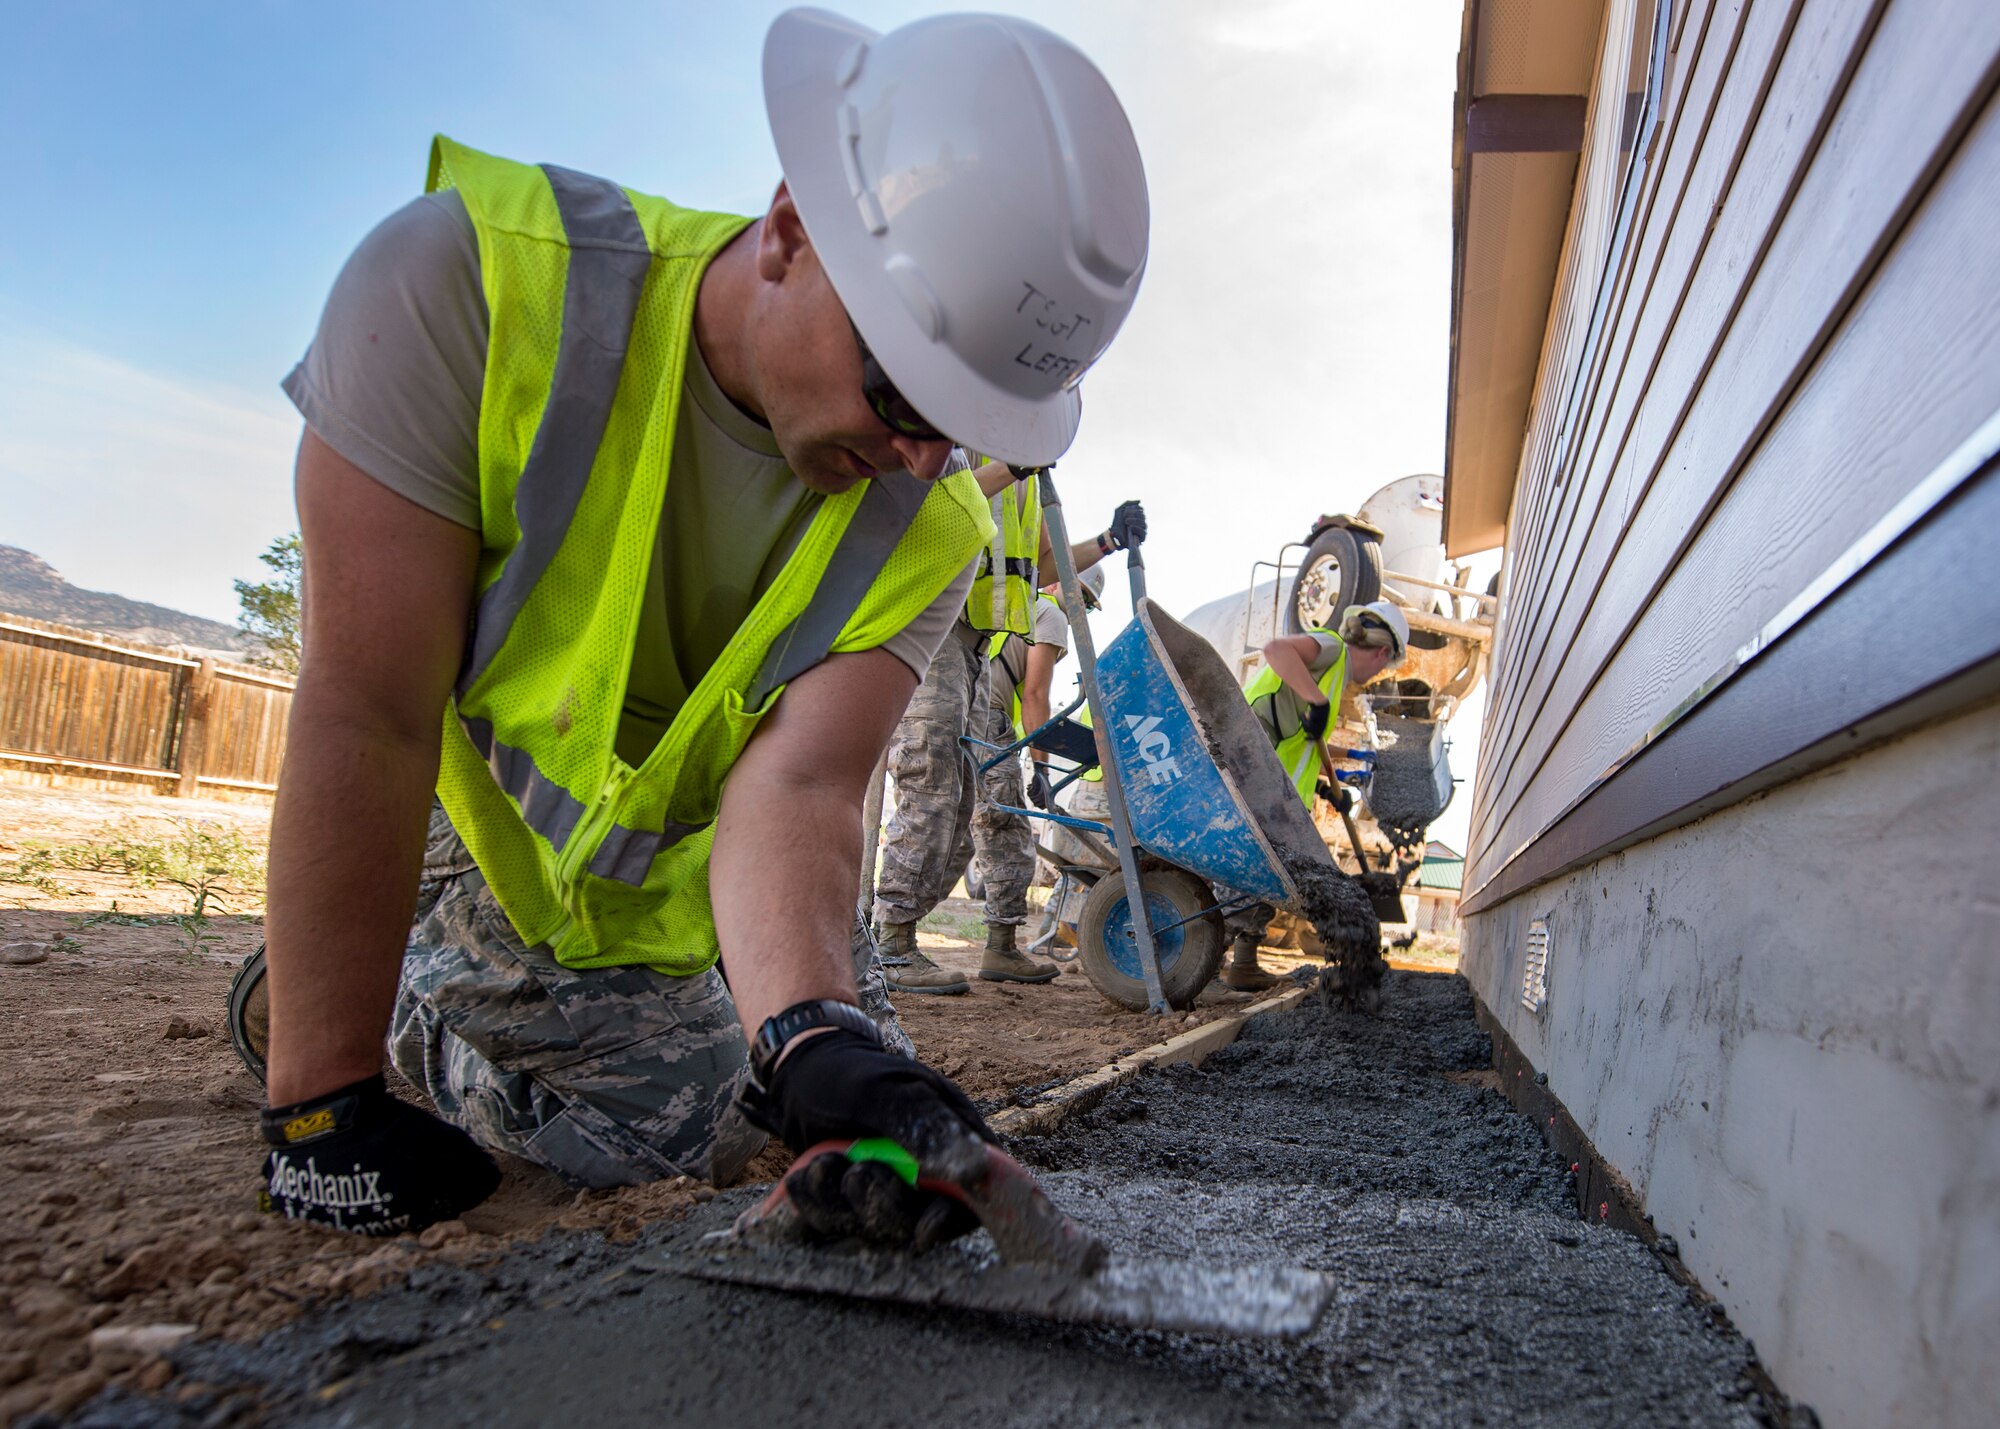 U.S. Air Force Tech. Sgt. Scott Leffler, 133rd Civil Engineer Squadron Structures shop, smooths out a recently poured apron around a recently constructed modular home in Gallup, N.M., July 25, 2018.